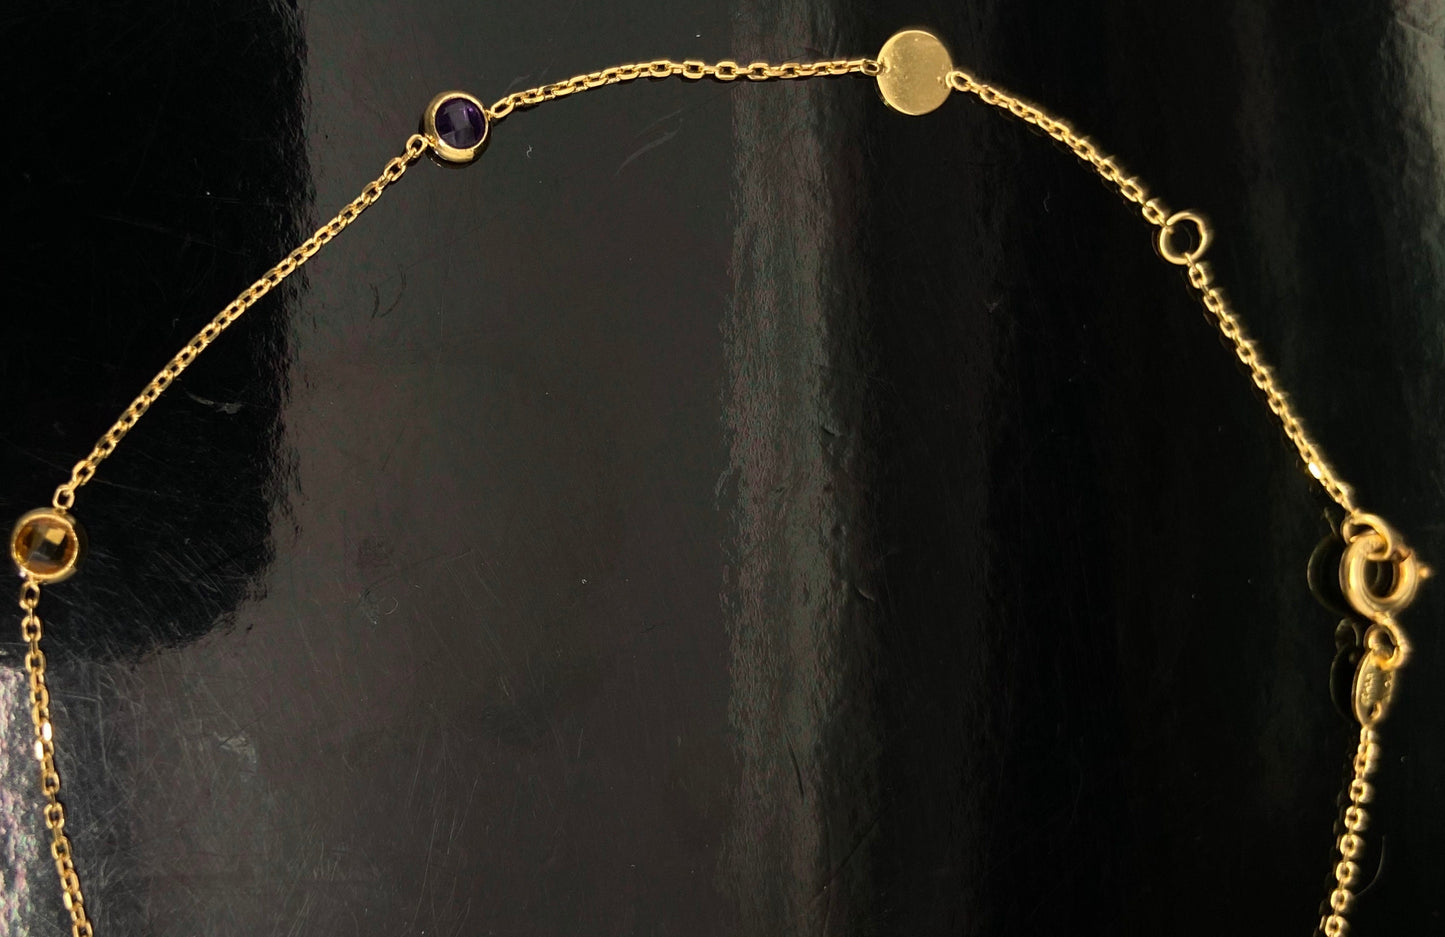 Yellow Gold Round Multi-Color Tourmaline and Disc Station Adjustable Anklet Bracelet